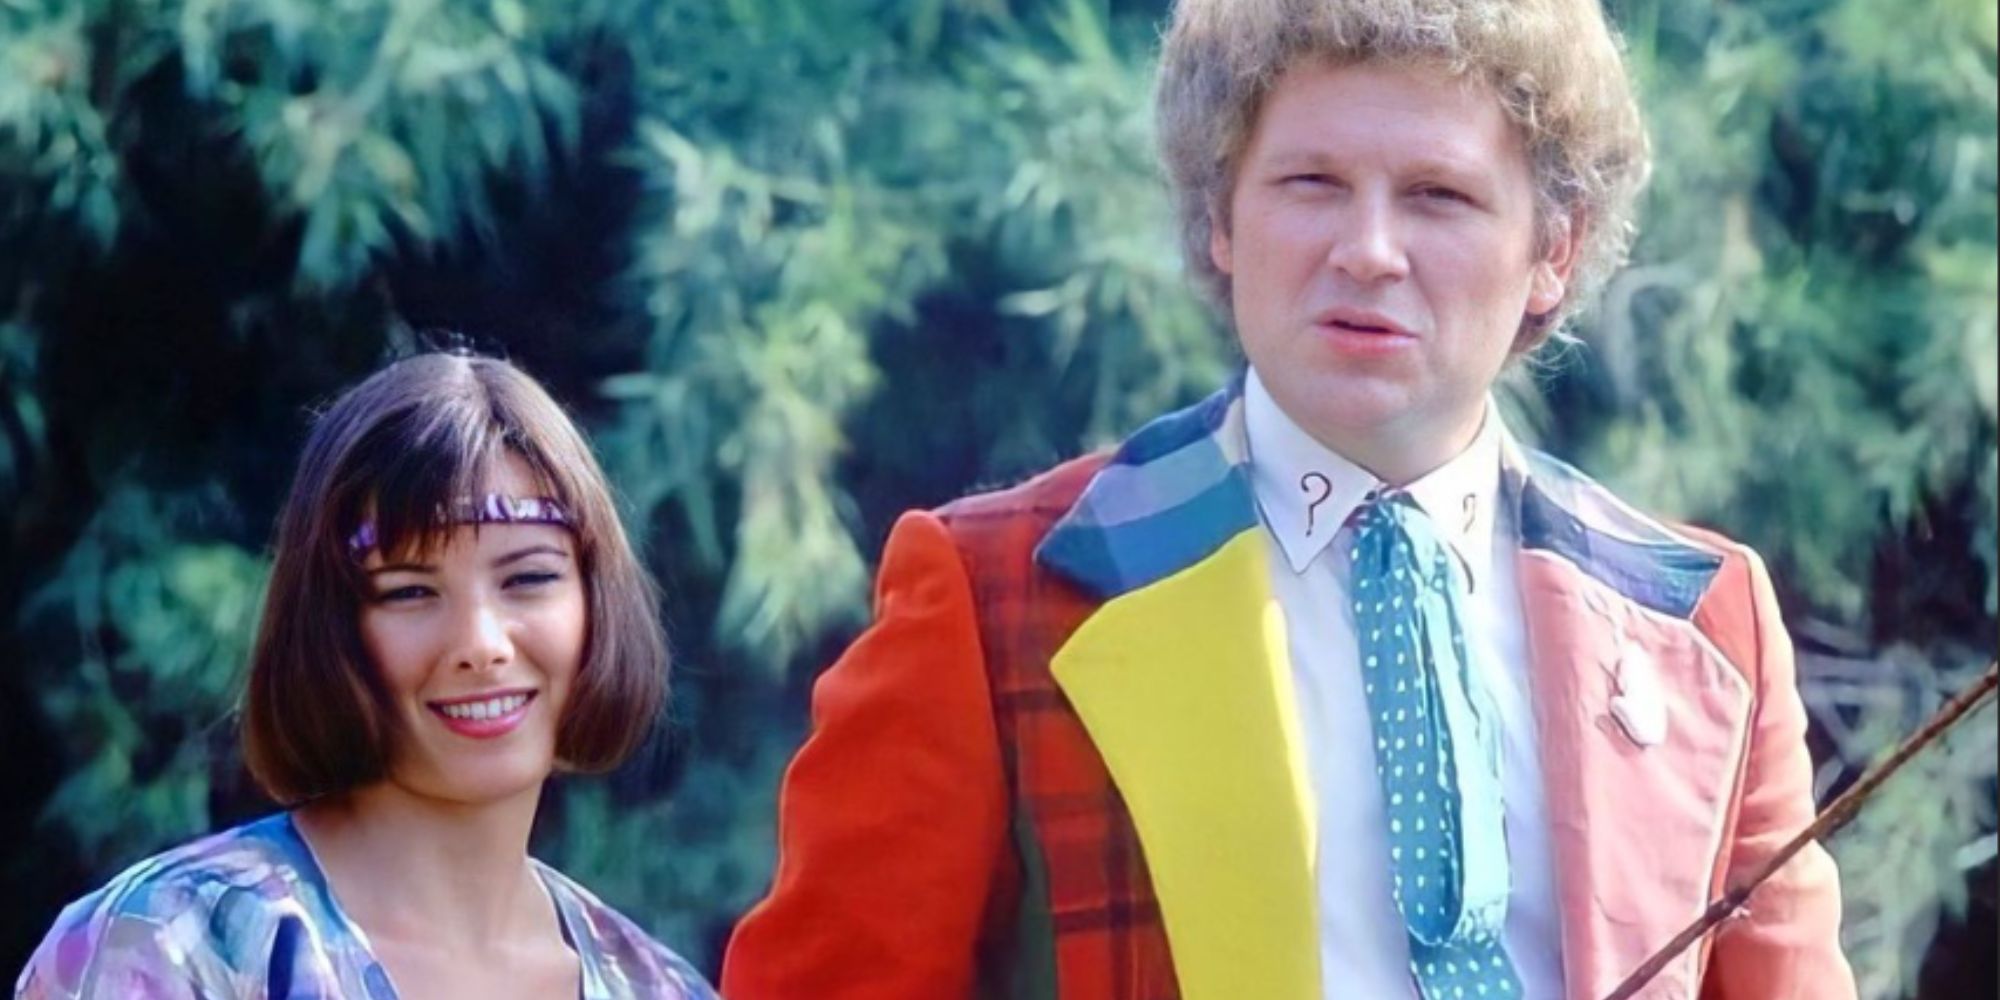 Nicola Bryant as Peri Brown smiling alongside a serious looking Colin Baker as the Sixth Doctor in Doctor Who